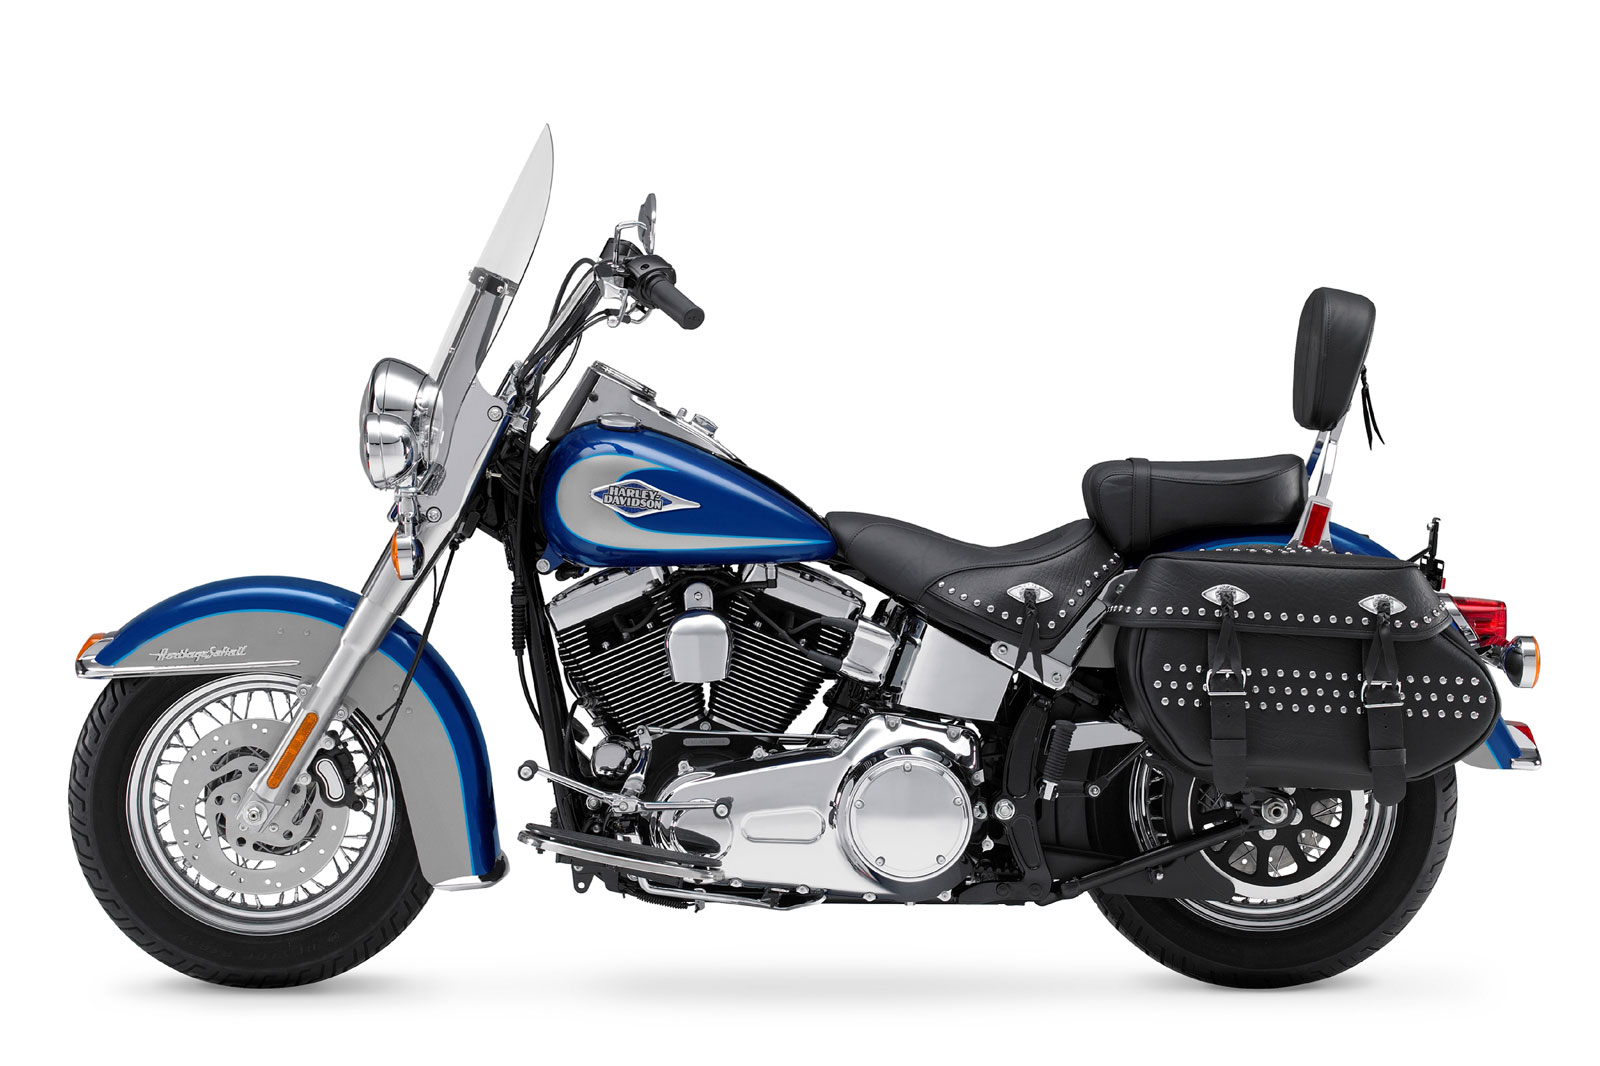 Review Of Harley Davidson 1340 Heritage Softail Classic Flstc 1992 Pictures Live Photos Description Harley Davidson 1340 Heritage Softail Classic Flstc 1992 Lovers Of Motorcycles